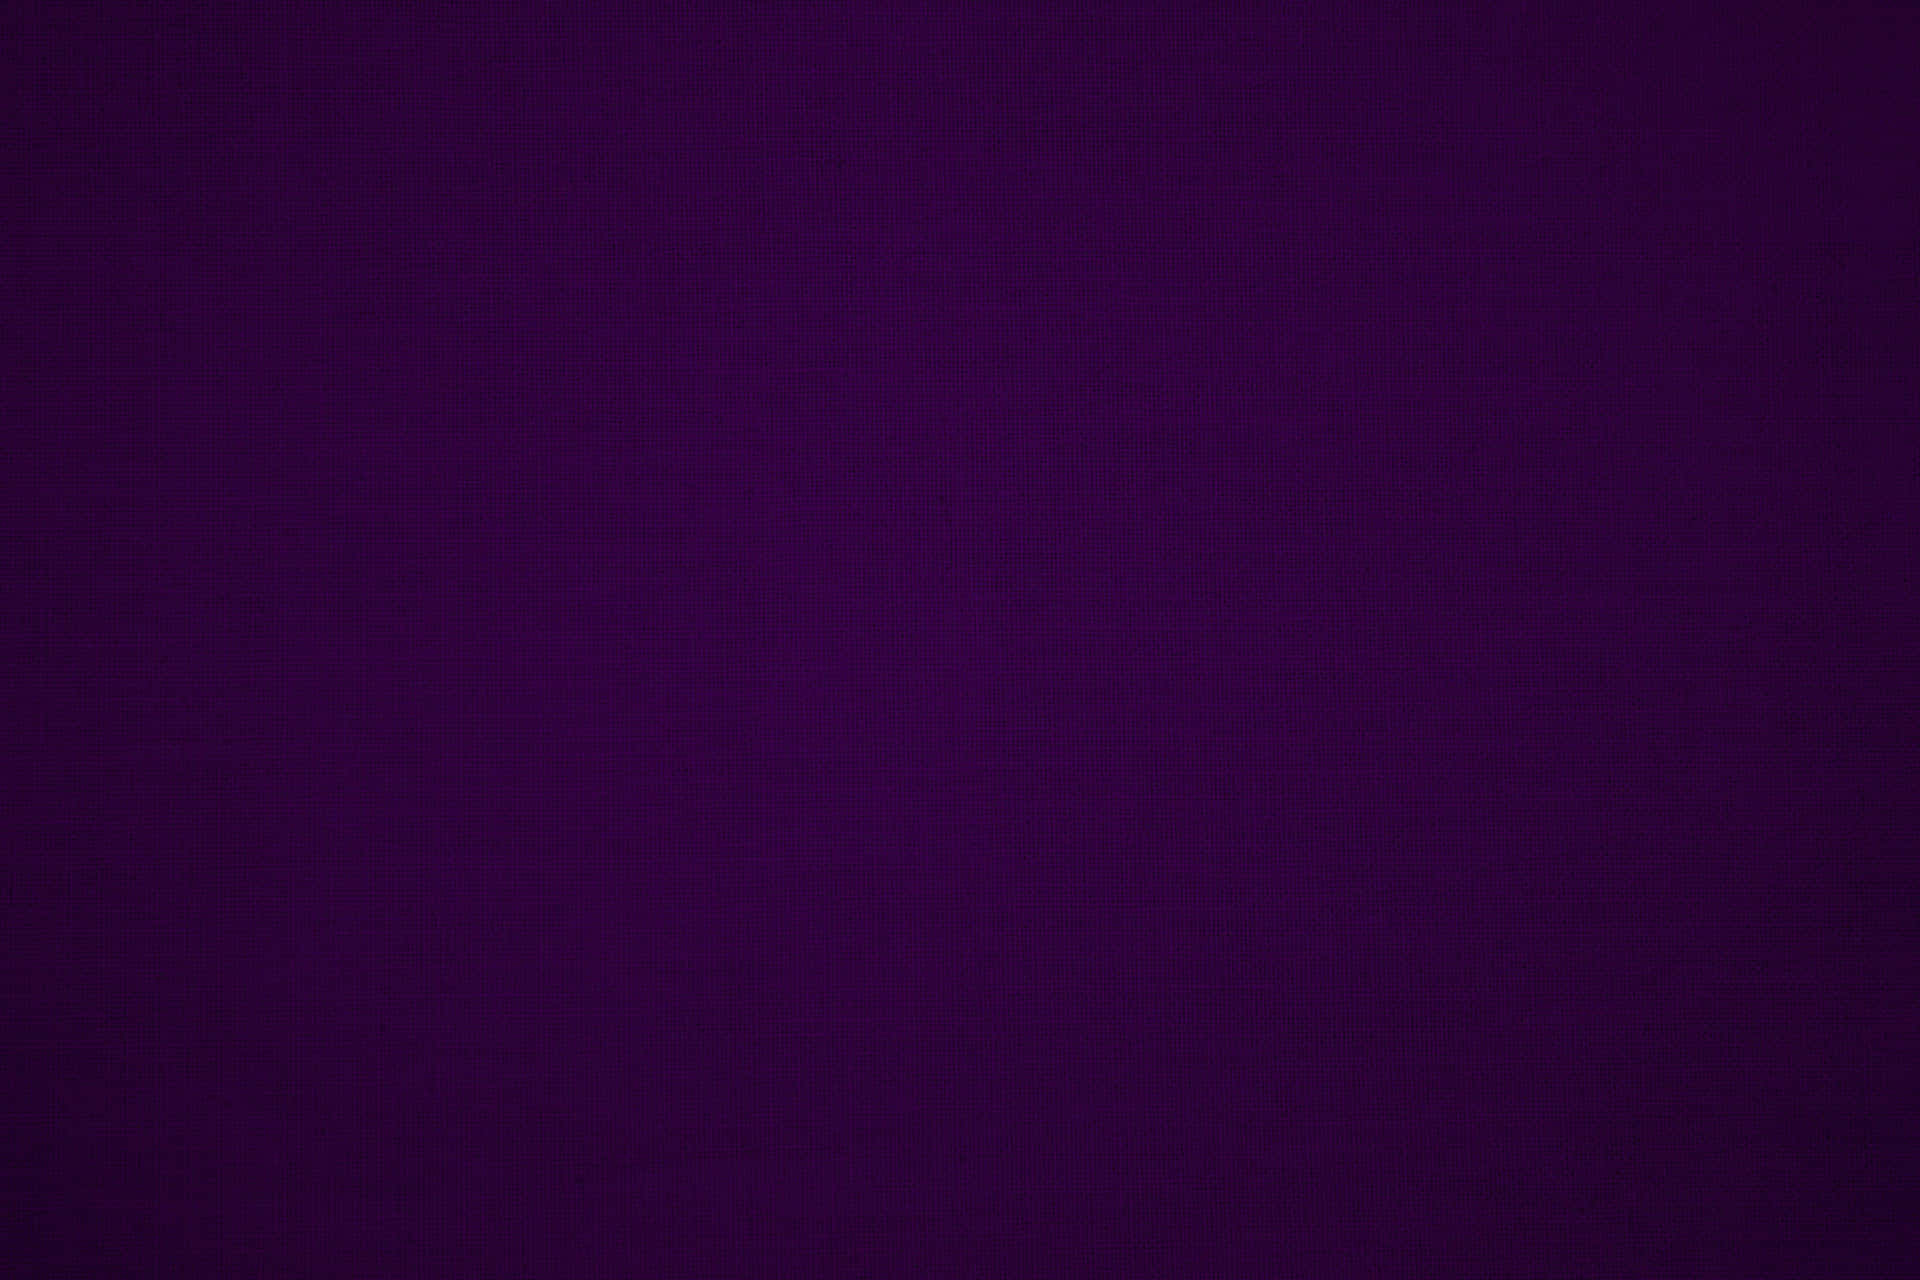 midnight blue and purple solid background